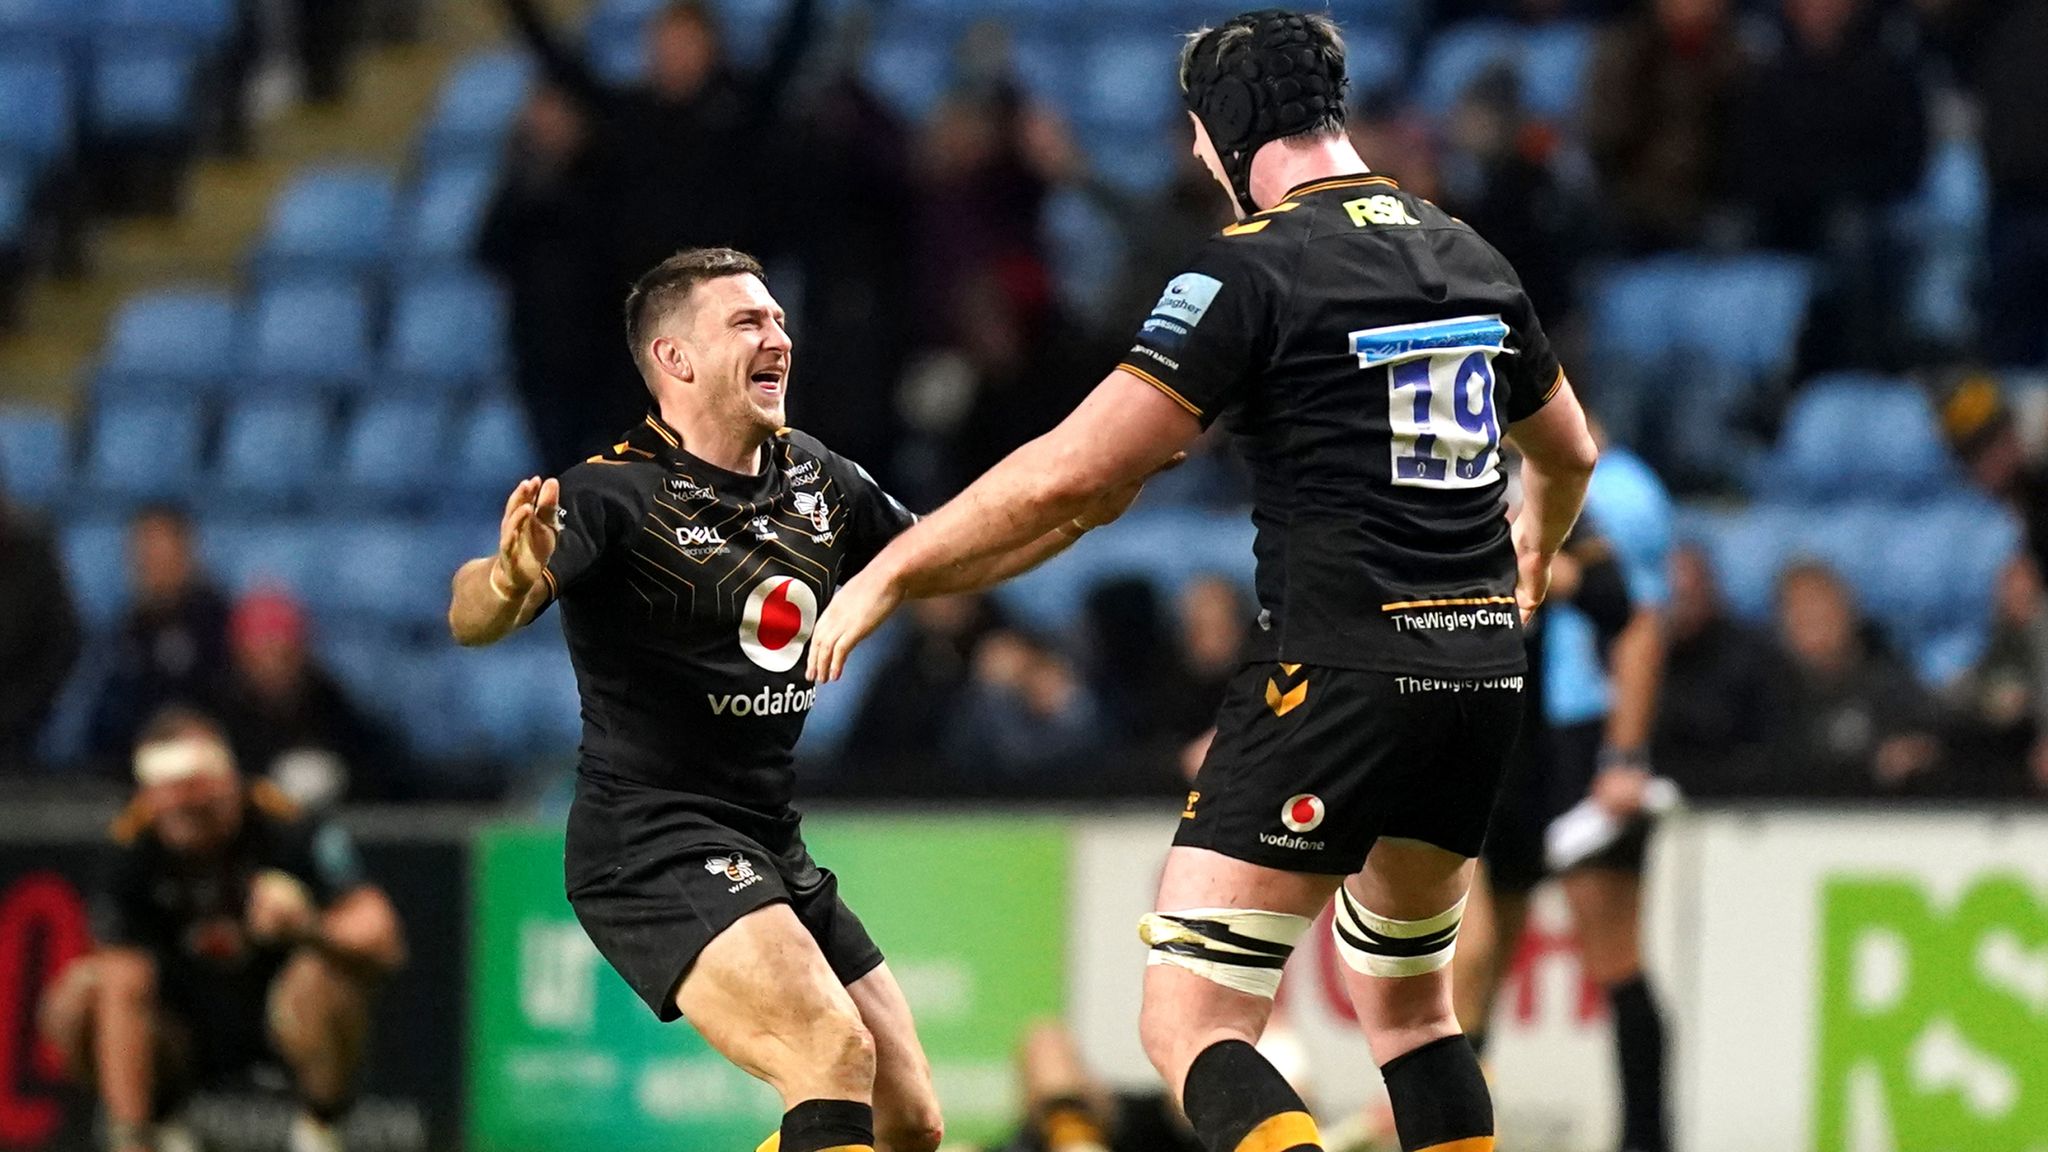 Gallagher Premiership Wasps end Leicester Tigers unbeaten run, Bath finally off mark Rugby Union News Sky Sports